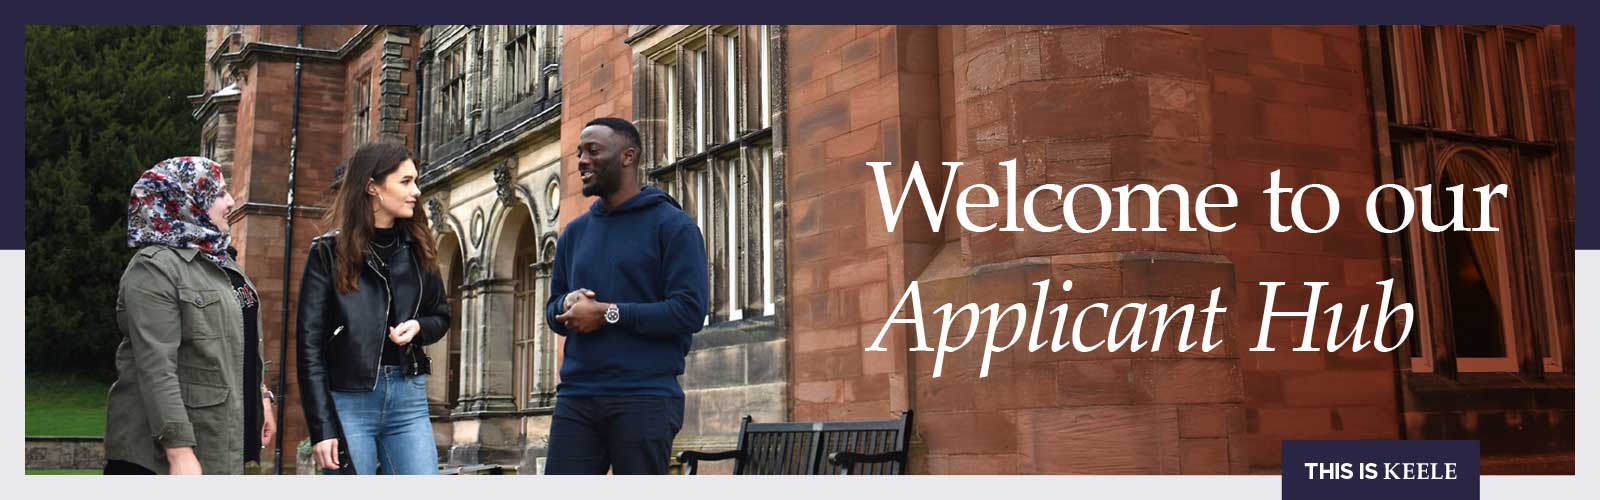 Students walking in front of Keele Hall. Message on the image reads: Welcome to our Applicant Hub